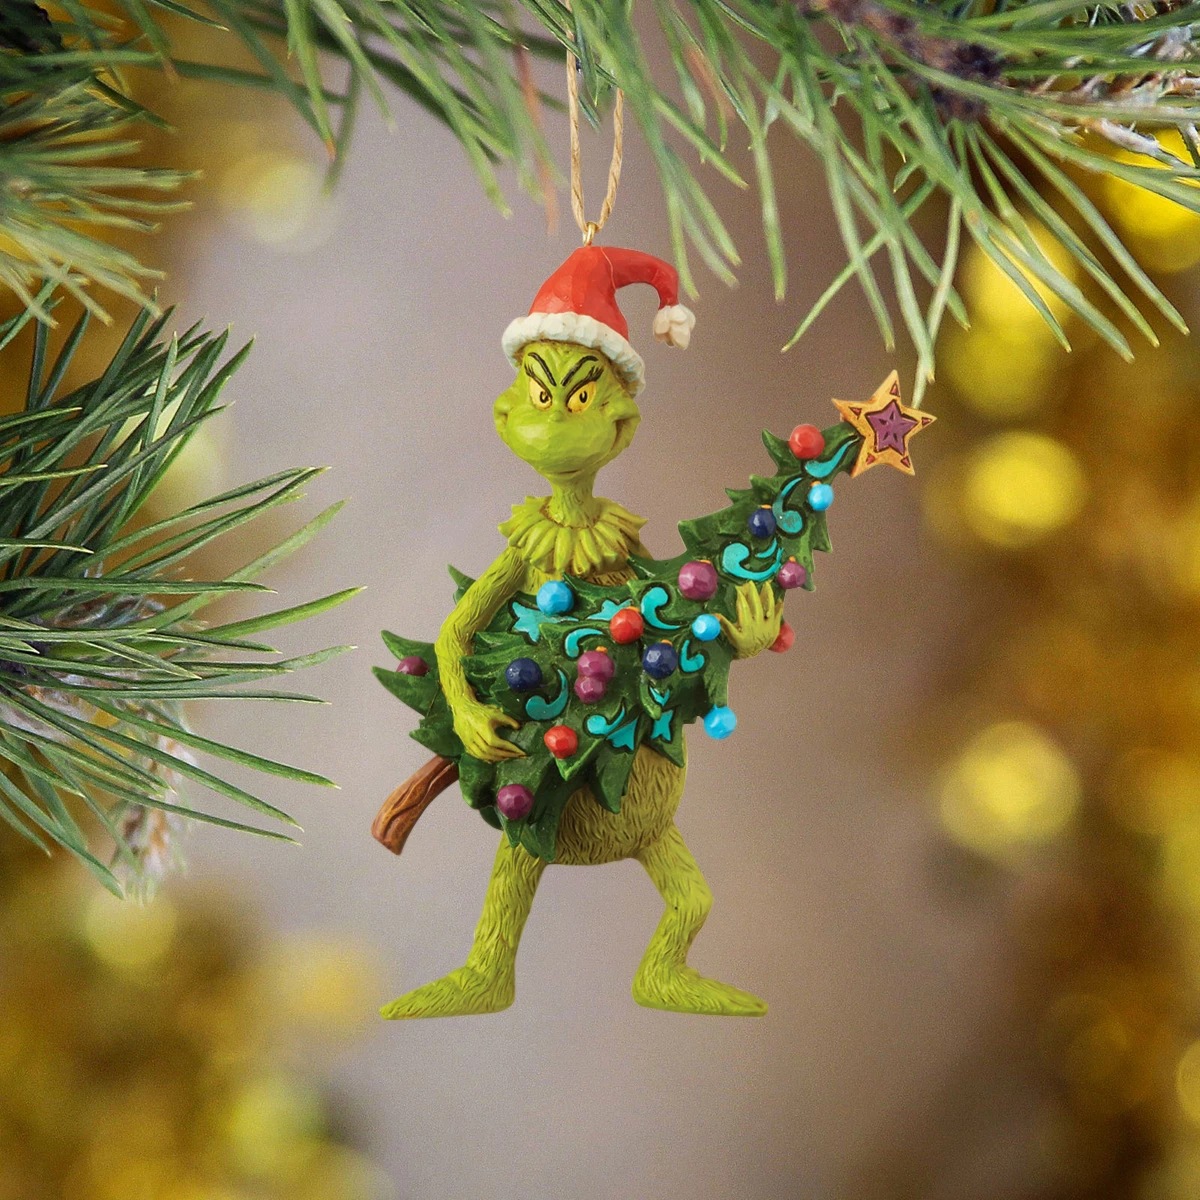 Grinch Holding Tree Ornament